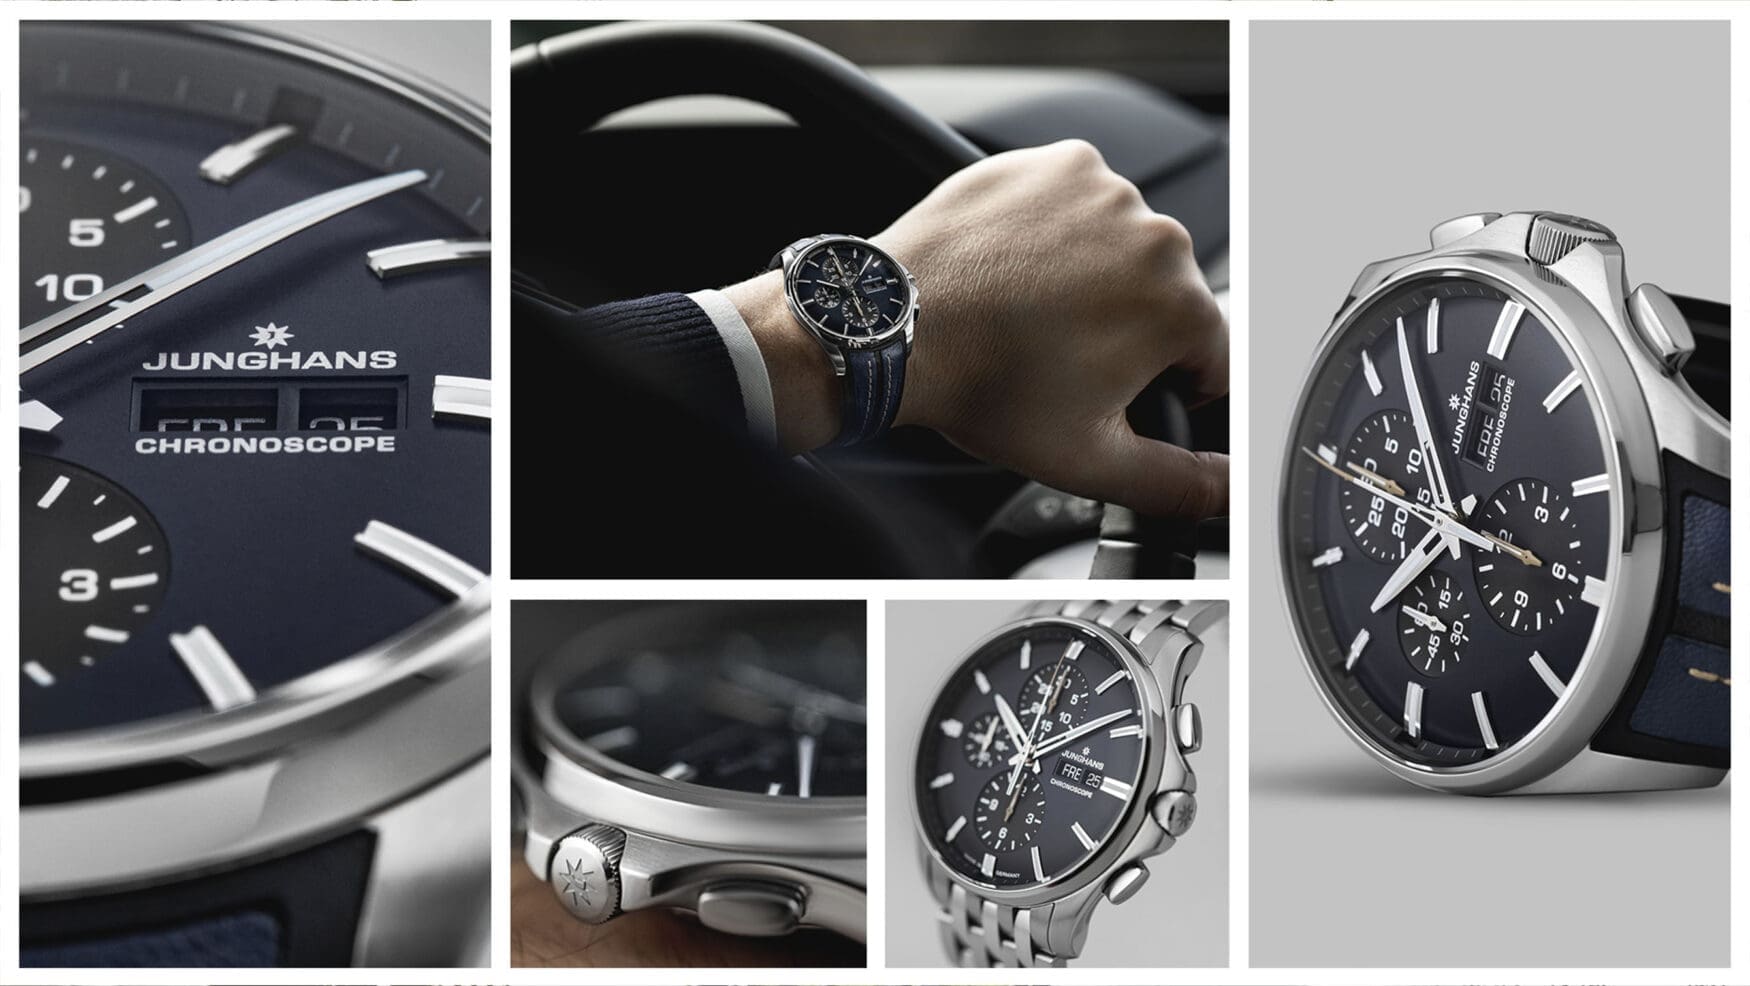 The Junghans Meister S Chronoscope blends dressy sophistication with all-out sports utility